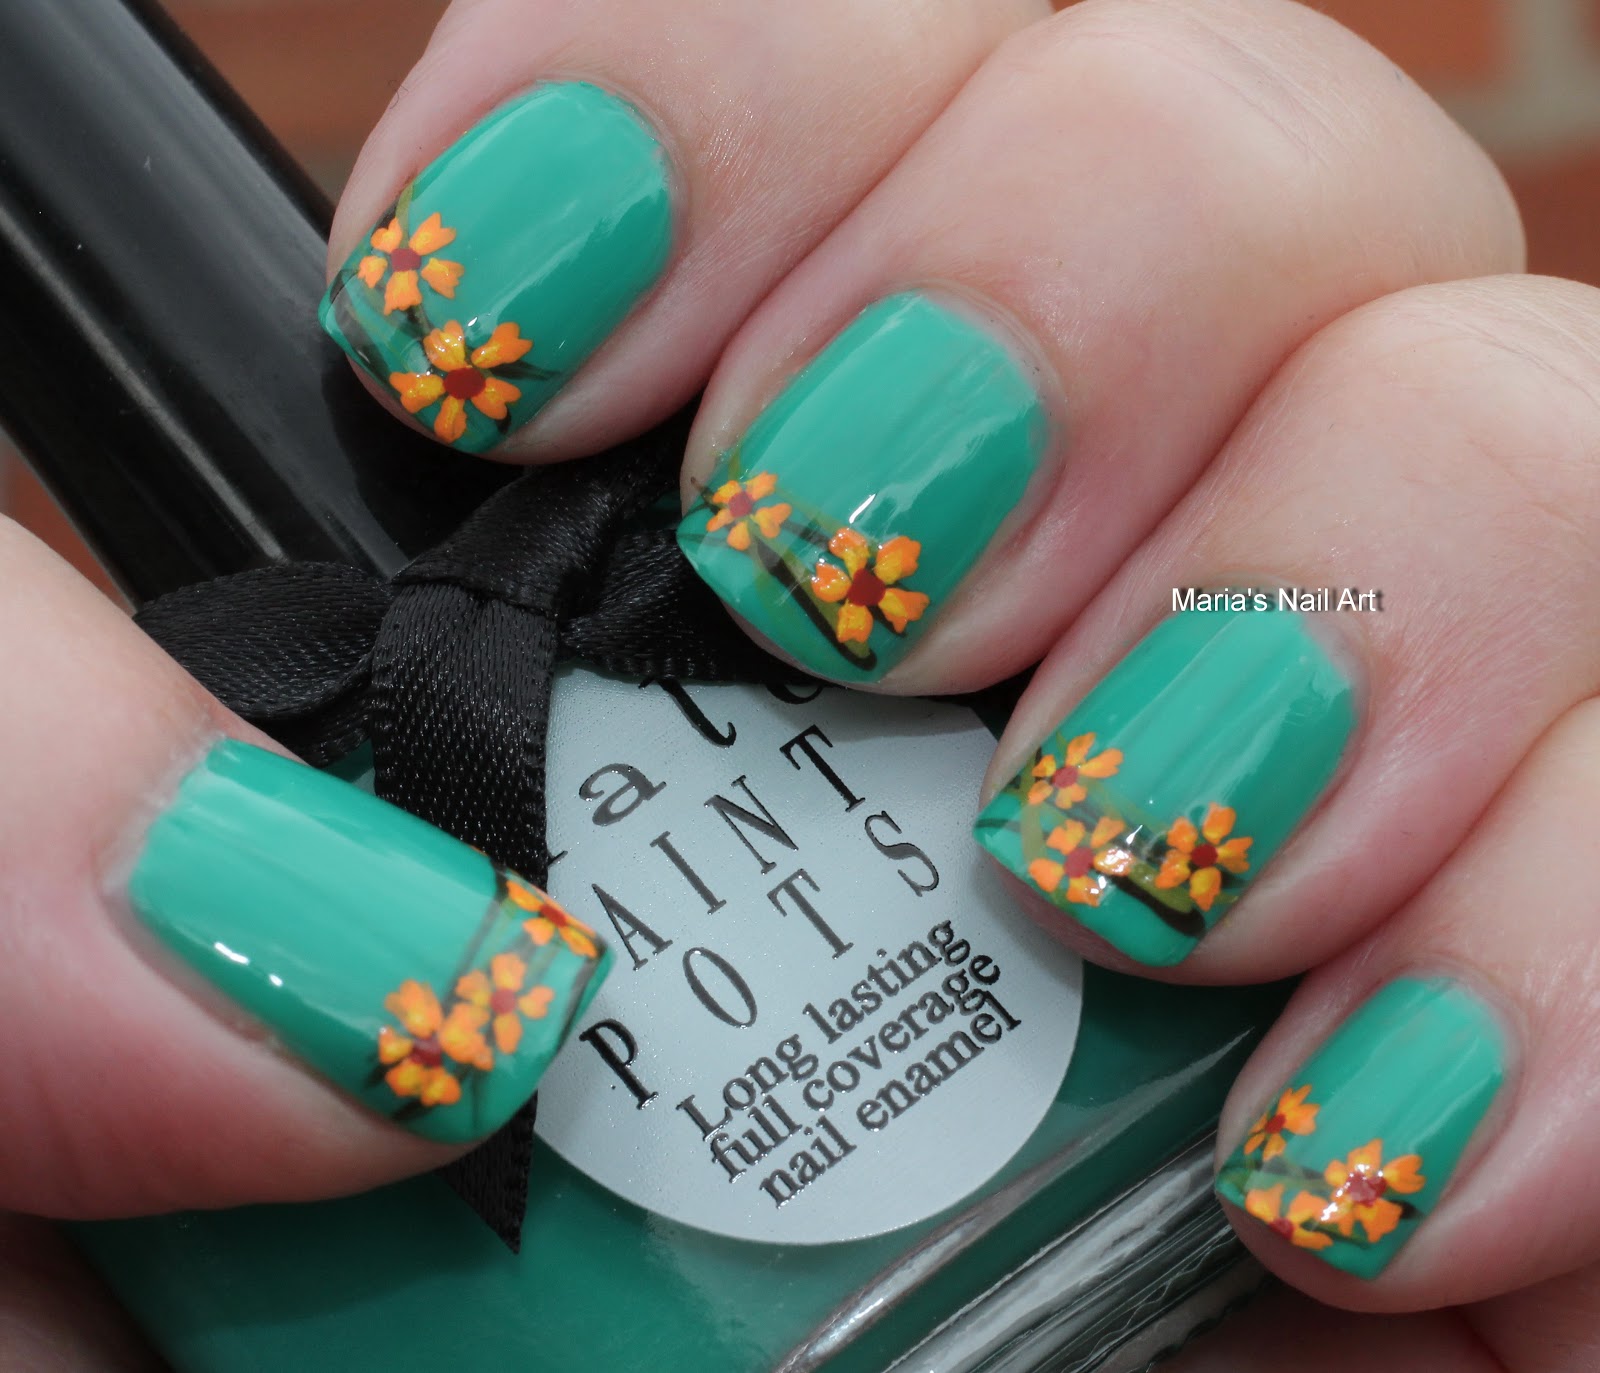 Marias Nail Art and Polish Blog: Ditch the heels and put on some flowers